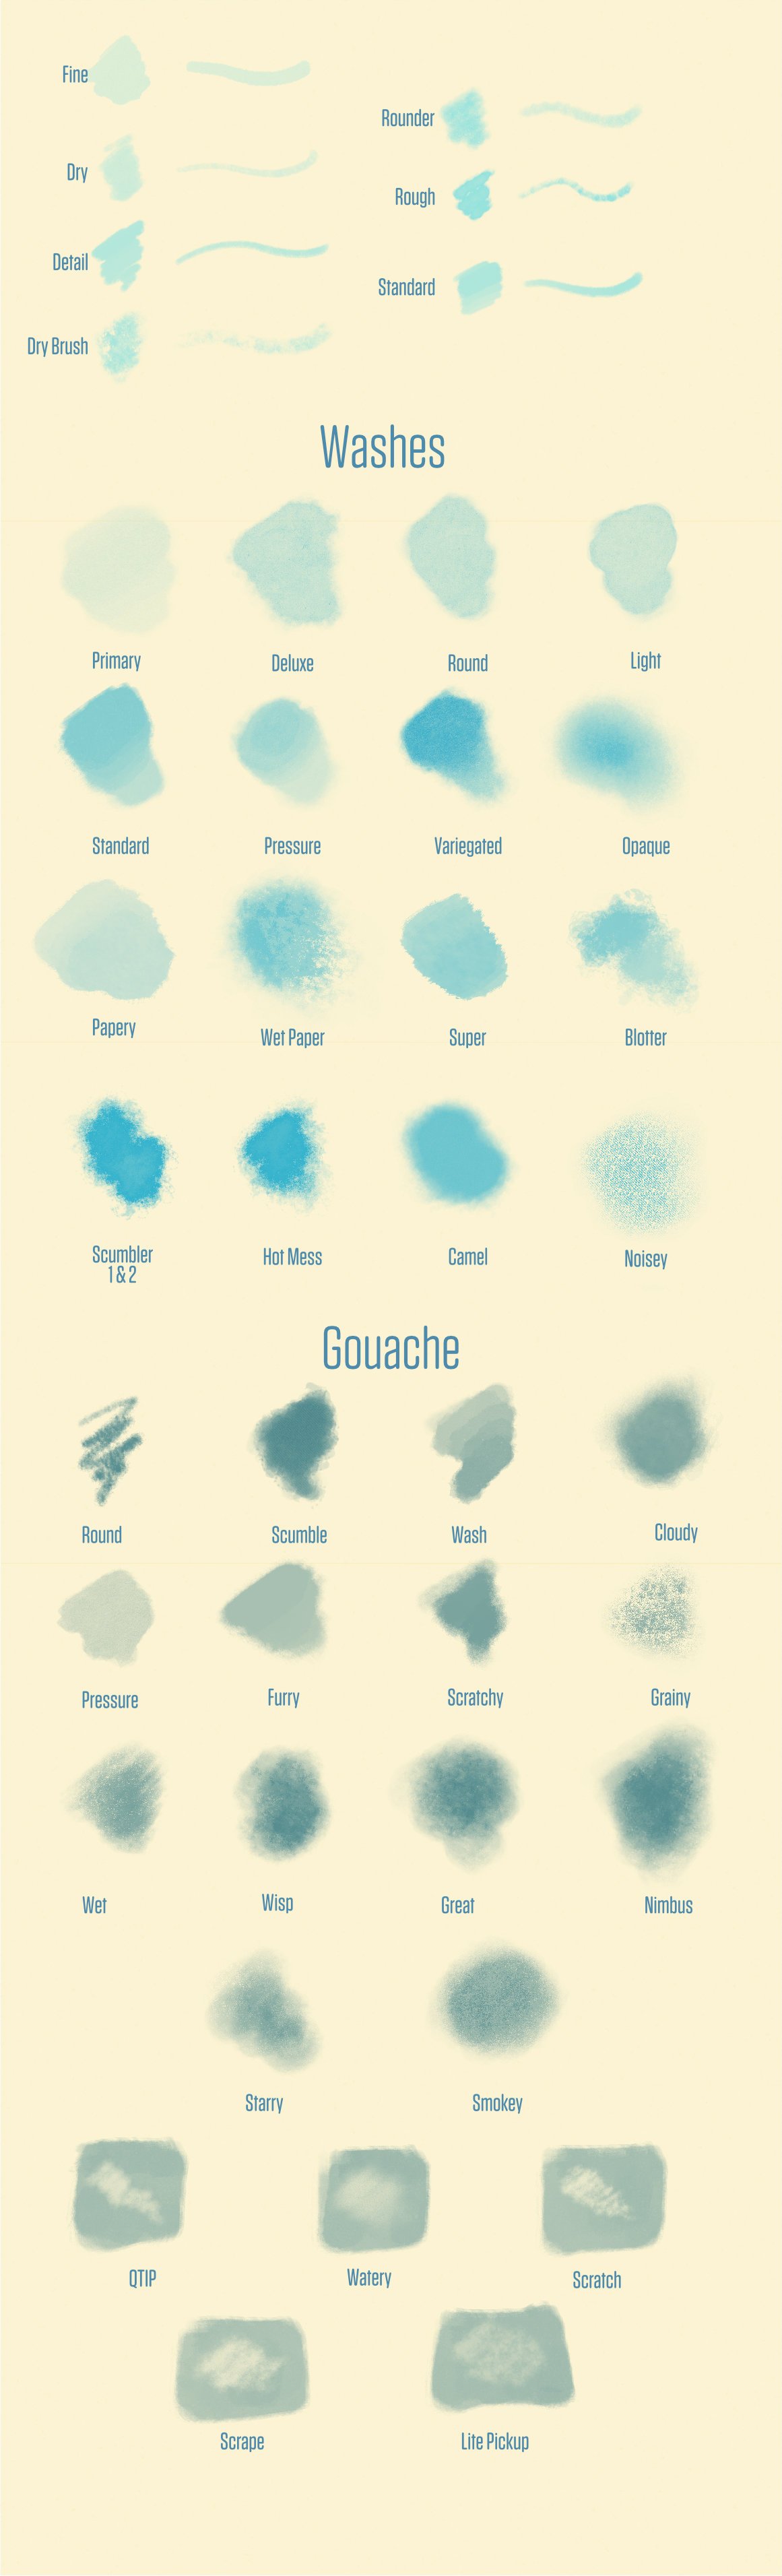 Watercolor & Gouache brushes for Affinity